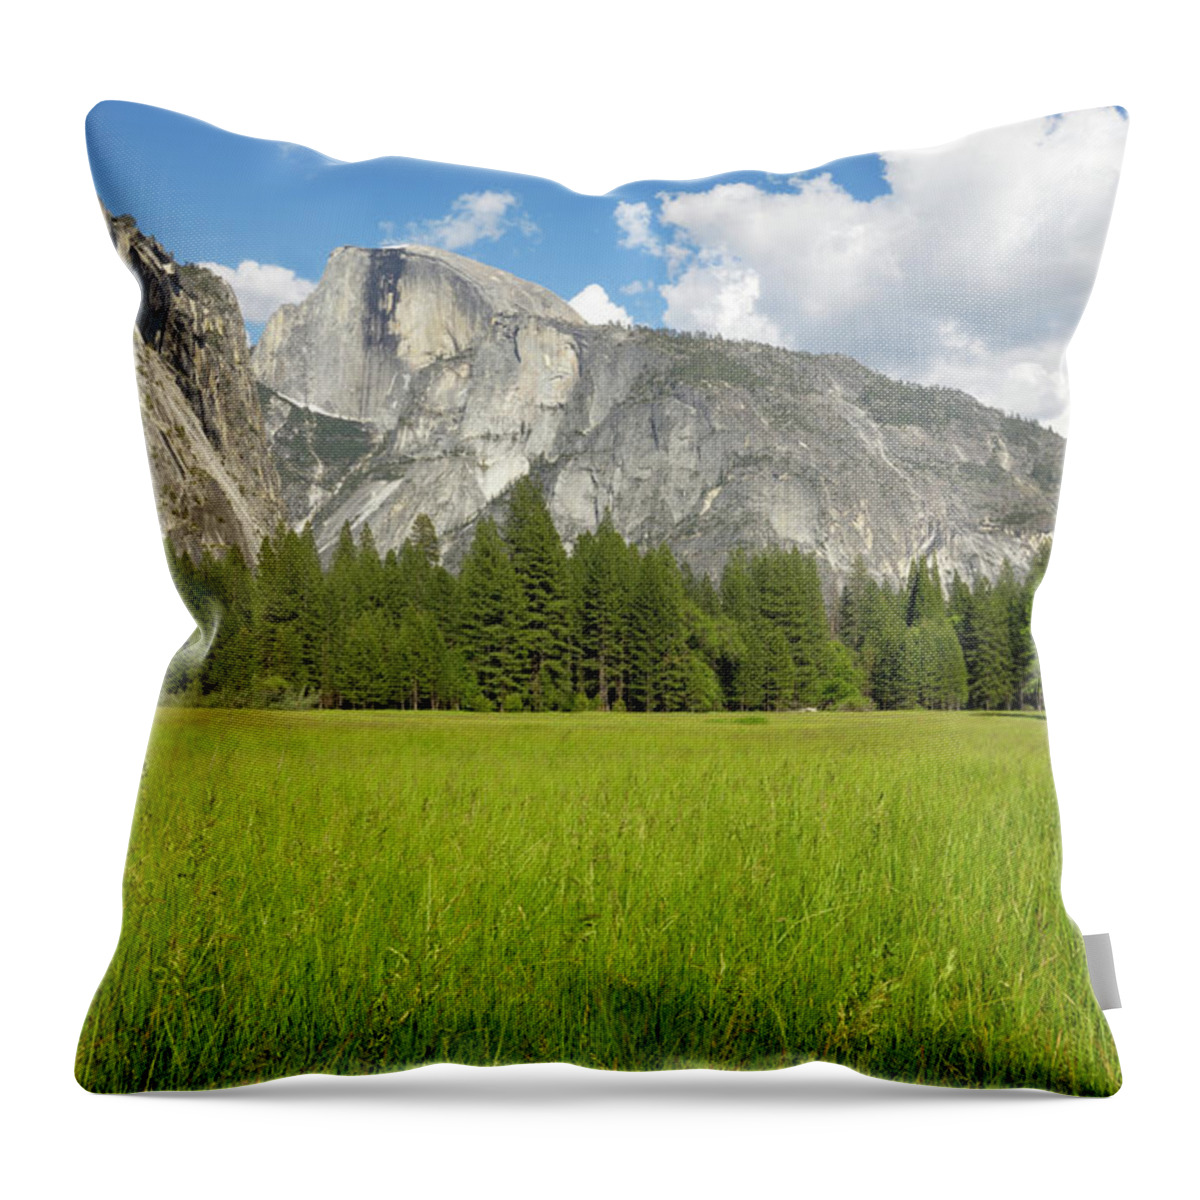 Scenics Throw Pillow featuring the photograph Yosemites Half Dome In The Spring by Gomezdavid